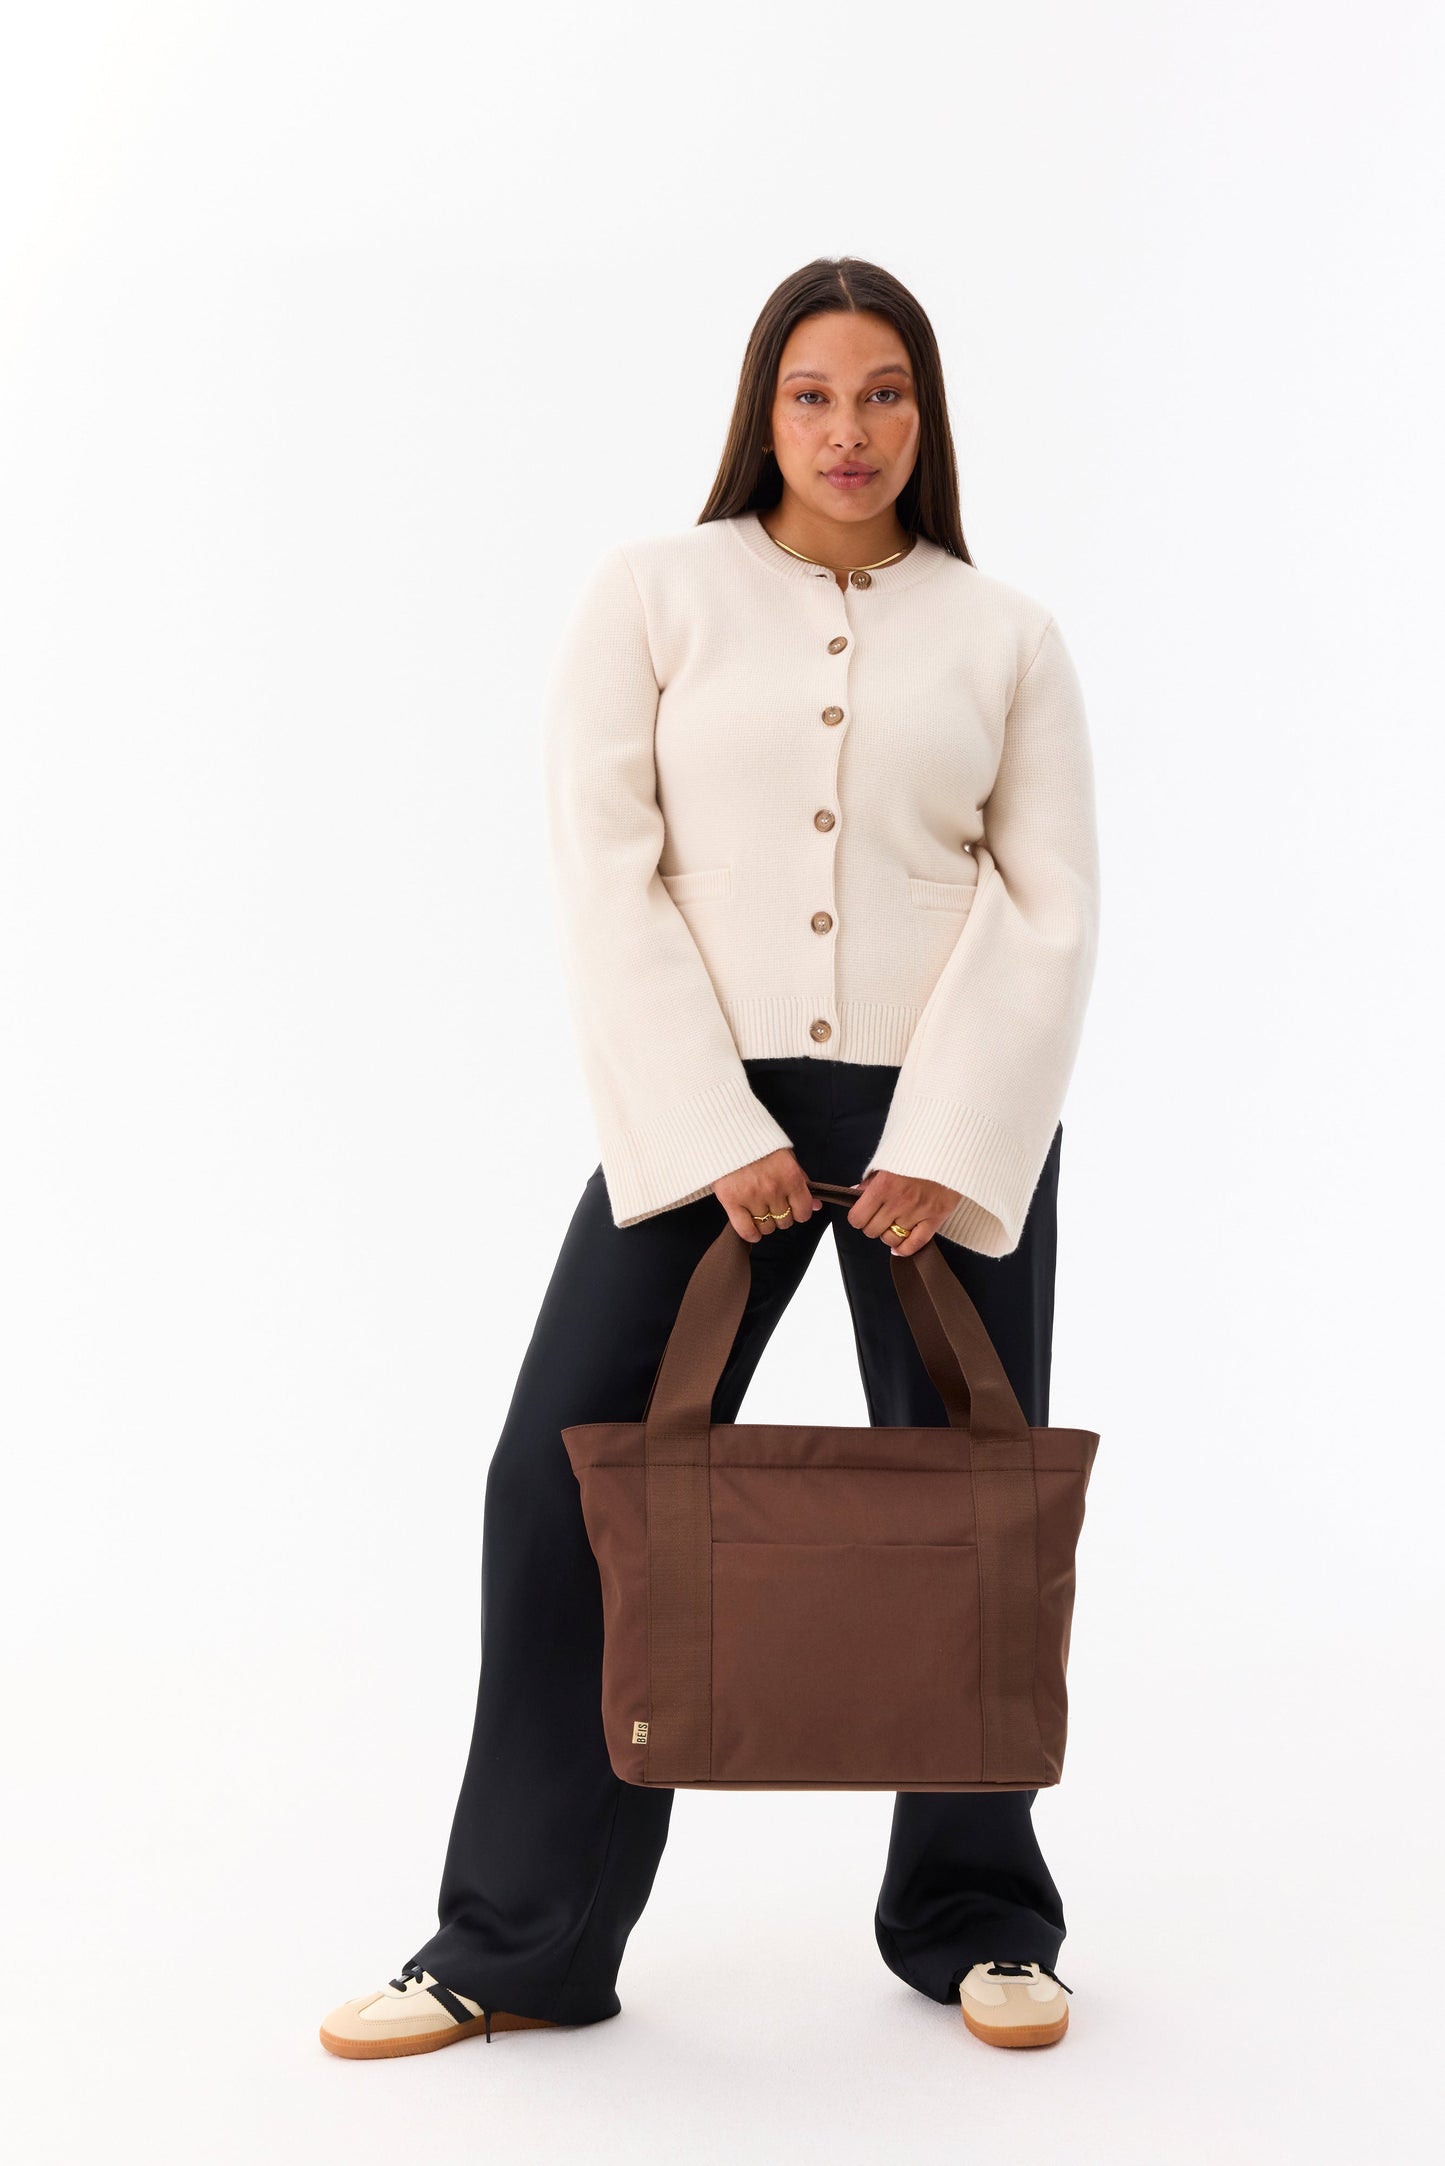 The BÉISics Tote in Maple